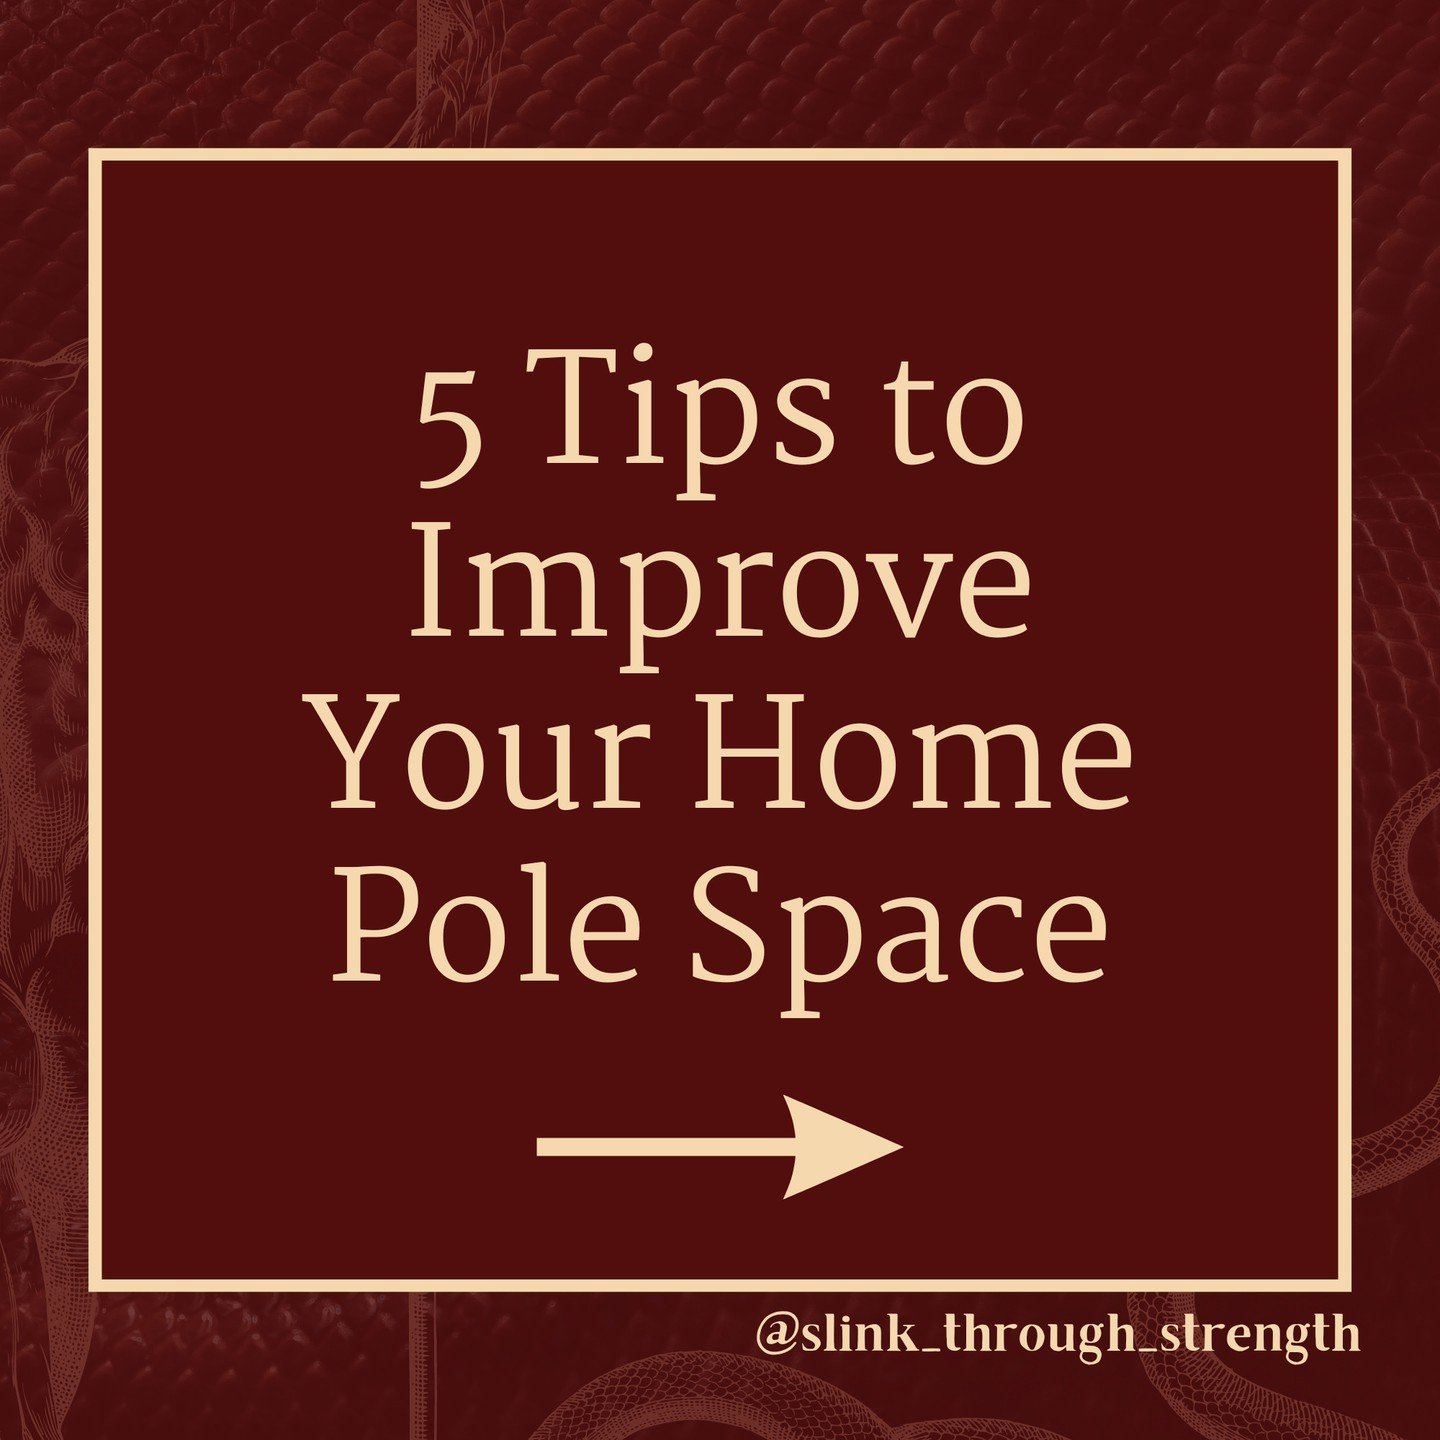 Some tips you can try to make your home pole space feel better. ❤️
.
#homepole #poleathome #onlinepole #onlinepolestudio #slinkthroughstrength #poledance